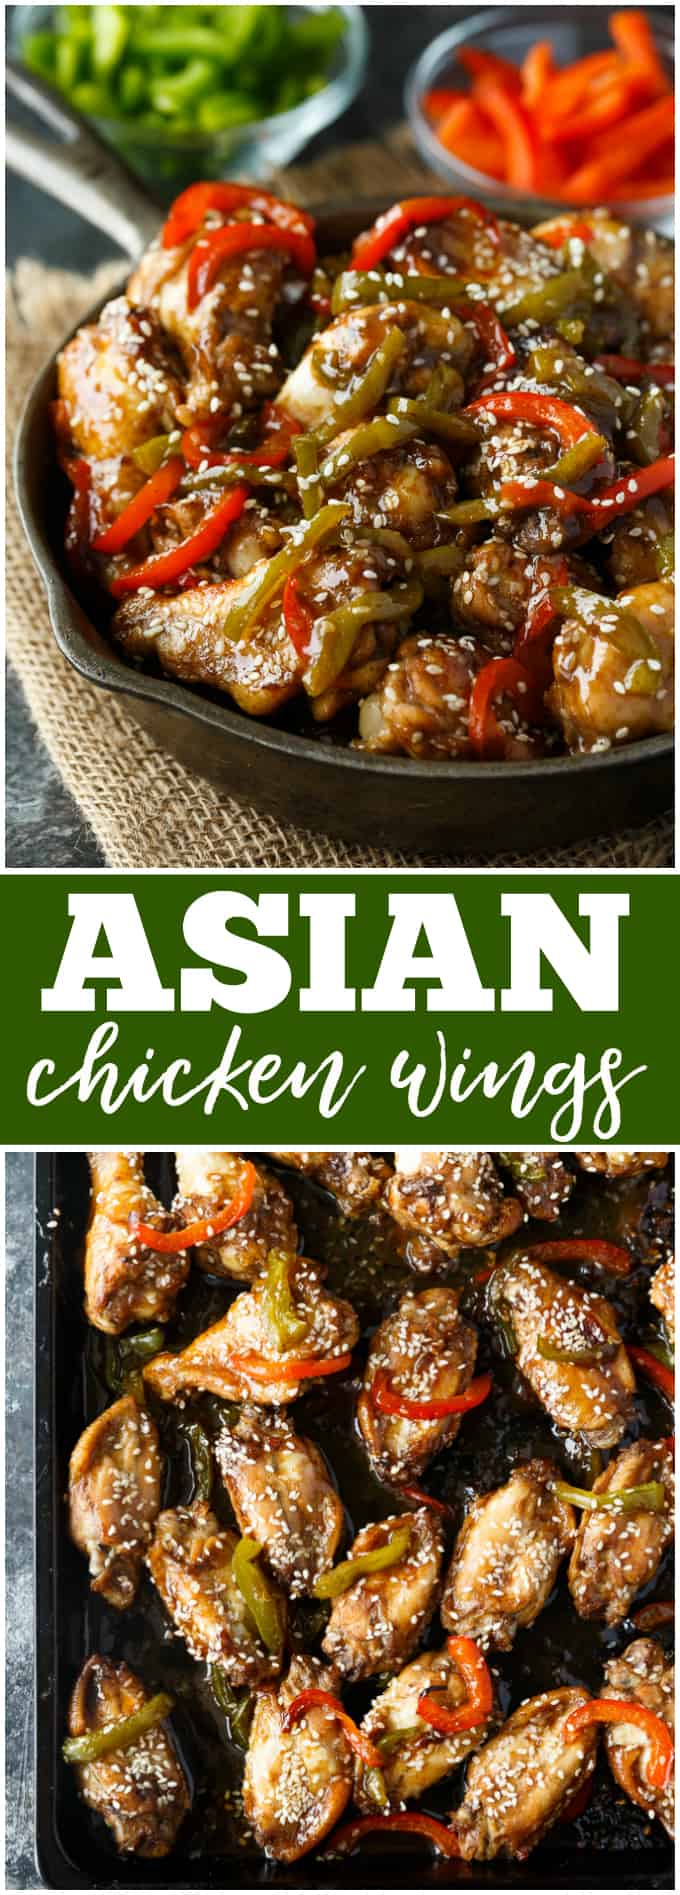 Asian Chicken Wings - Bring some zing to your tailgate or holiday party with this delicious appetizer! These wings are smothered in a homemade hoisin, sesame, and ginger sauce.